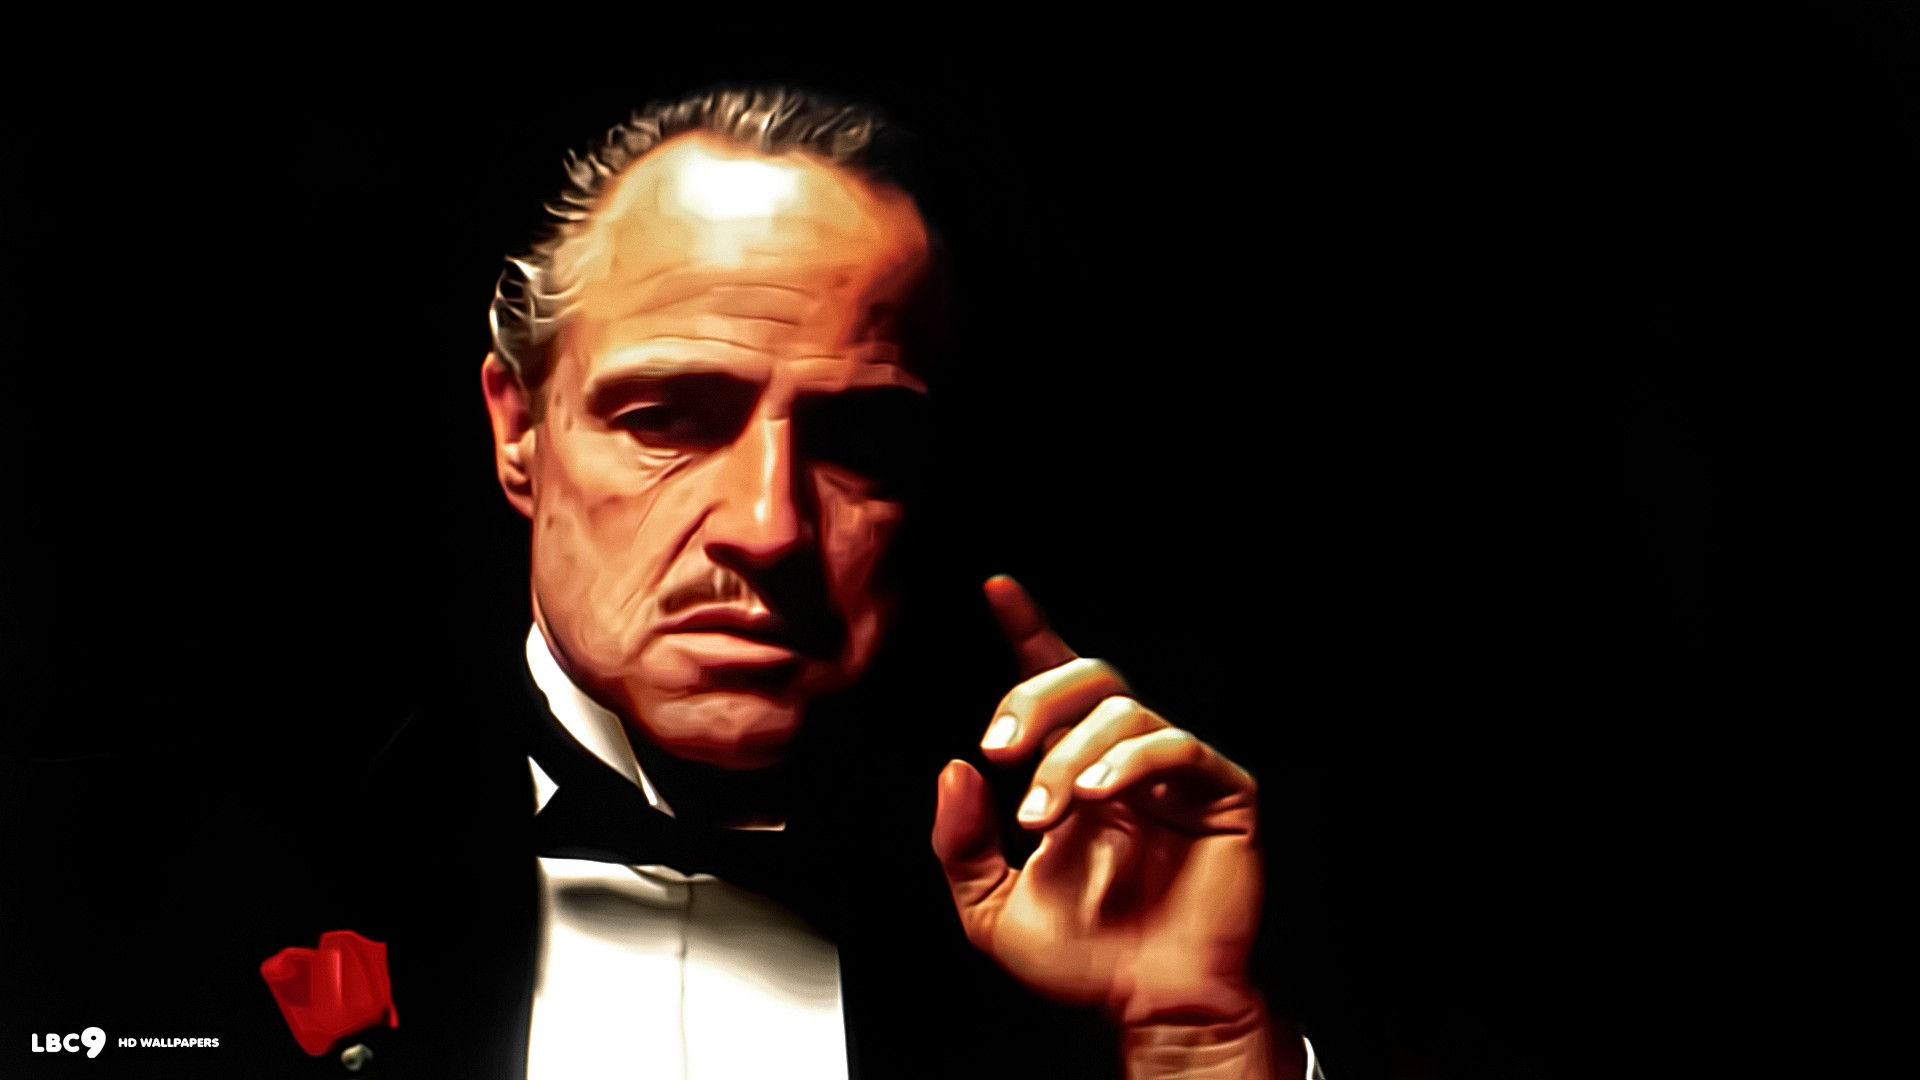 Godfather wallpaper 2 / 2 movie hd backgrounds